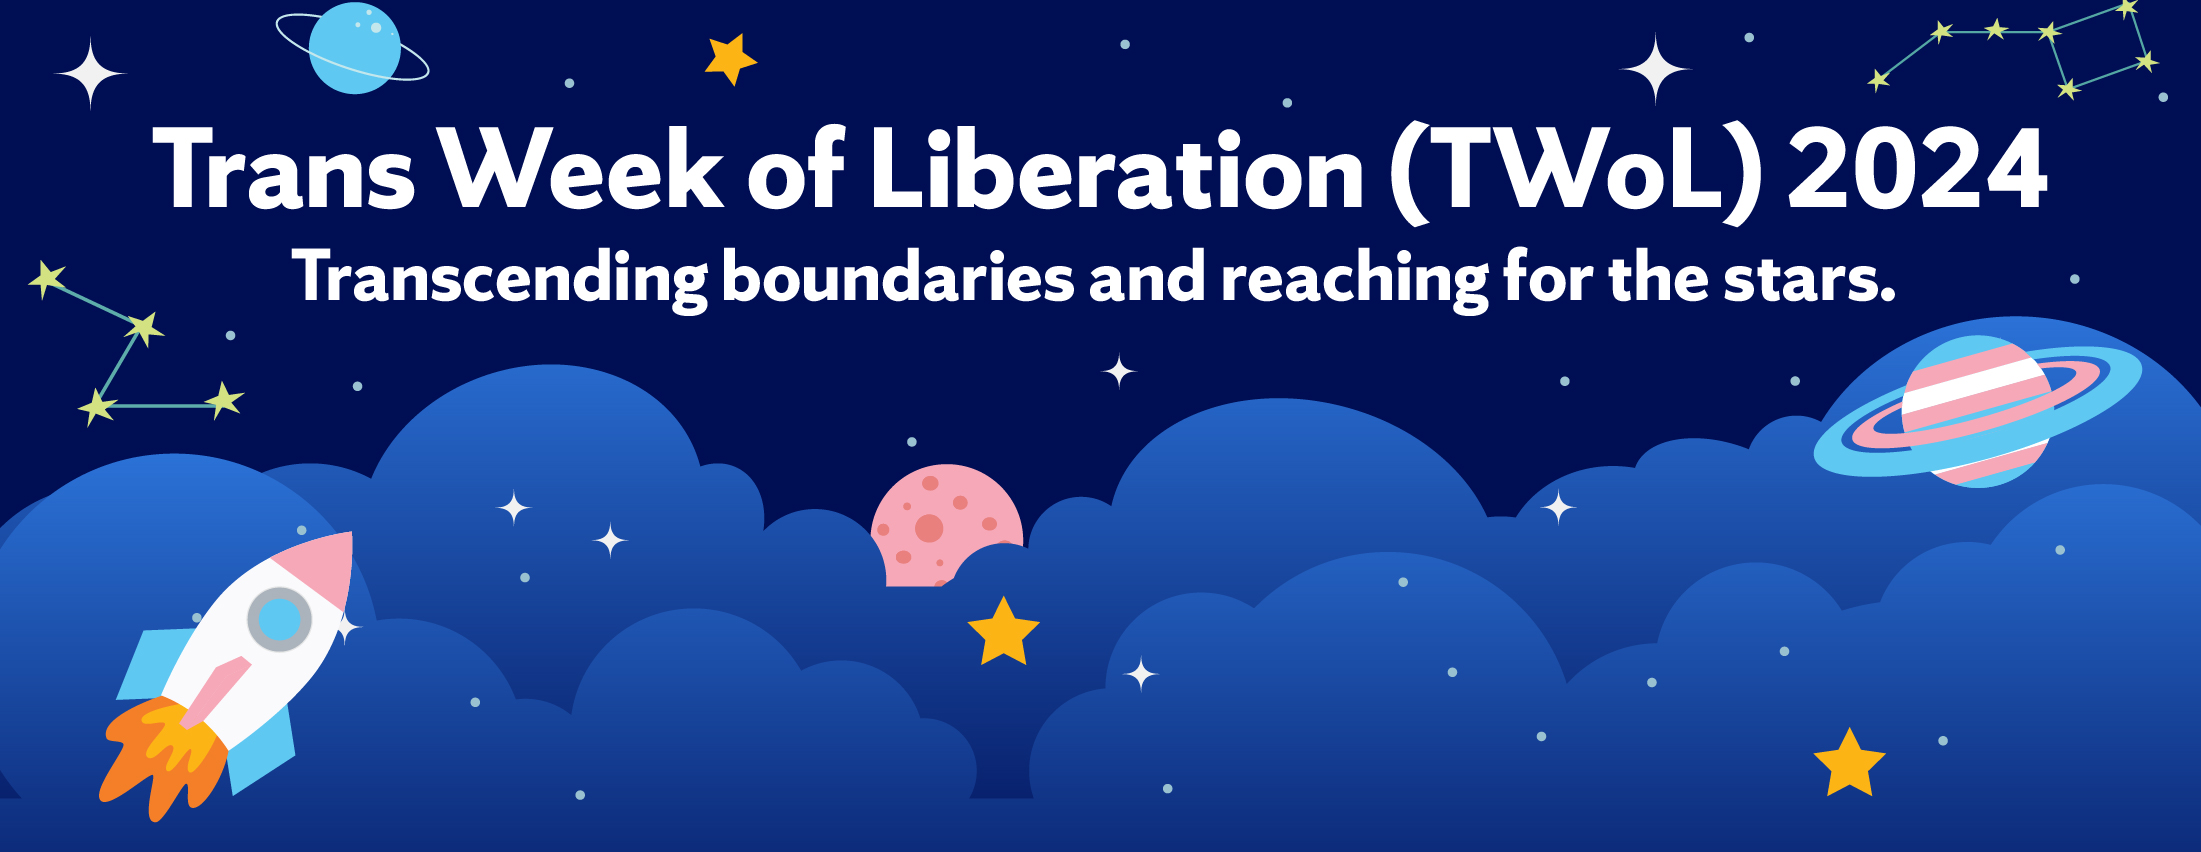 Trans Week of Liberation (TWoL) 2024 Transcending boundaries and reaching for the stars. with clouds, stars, planets and rocket ship